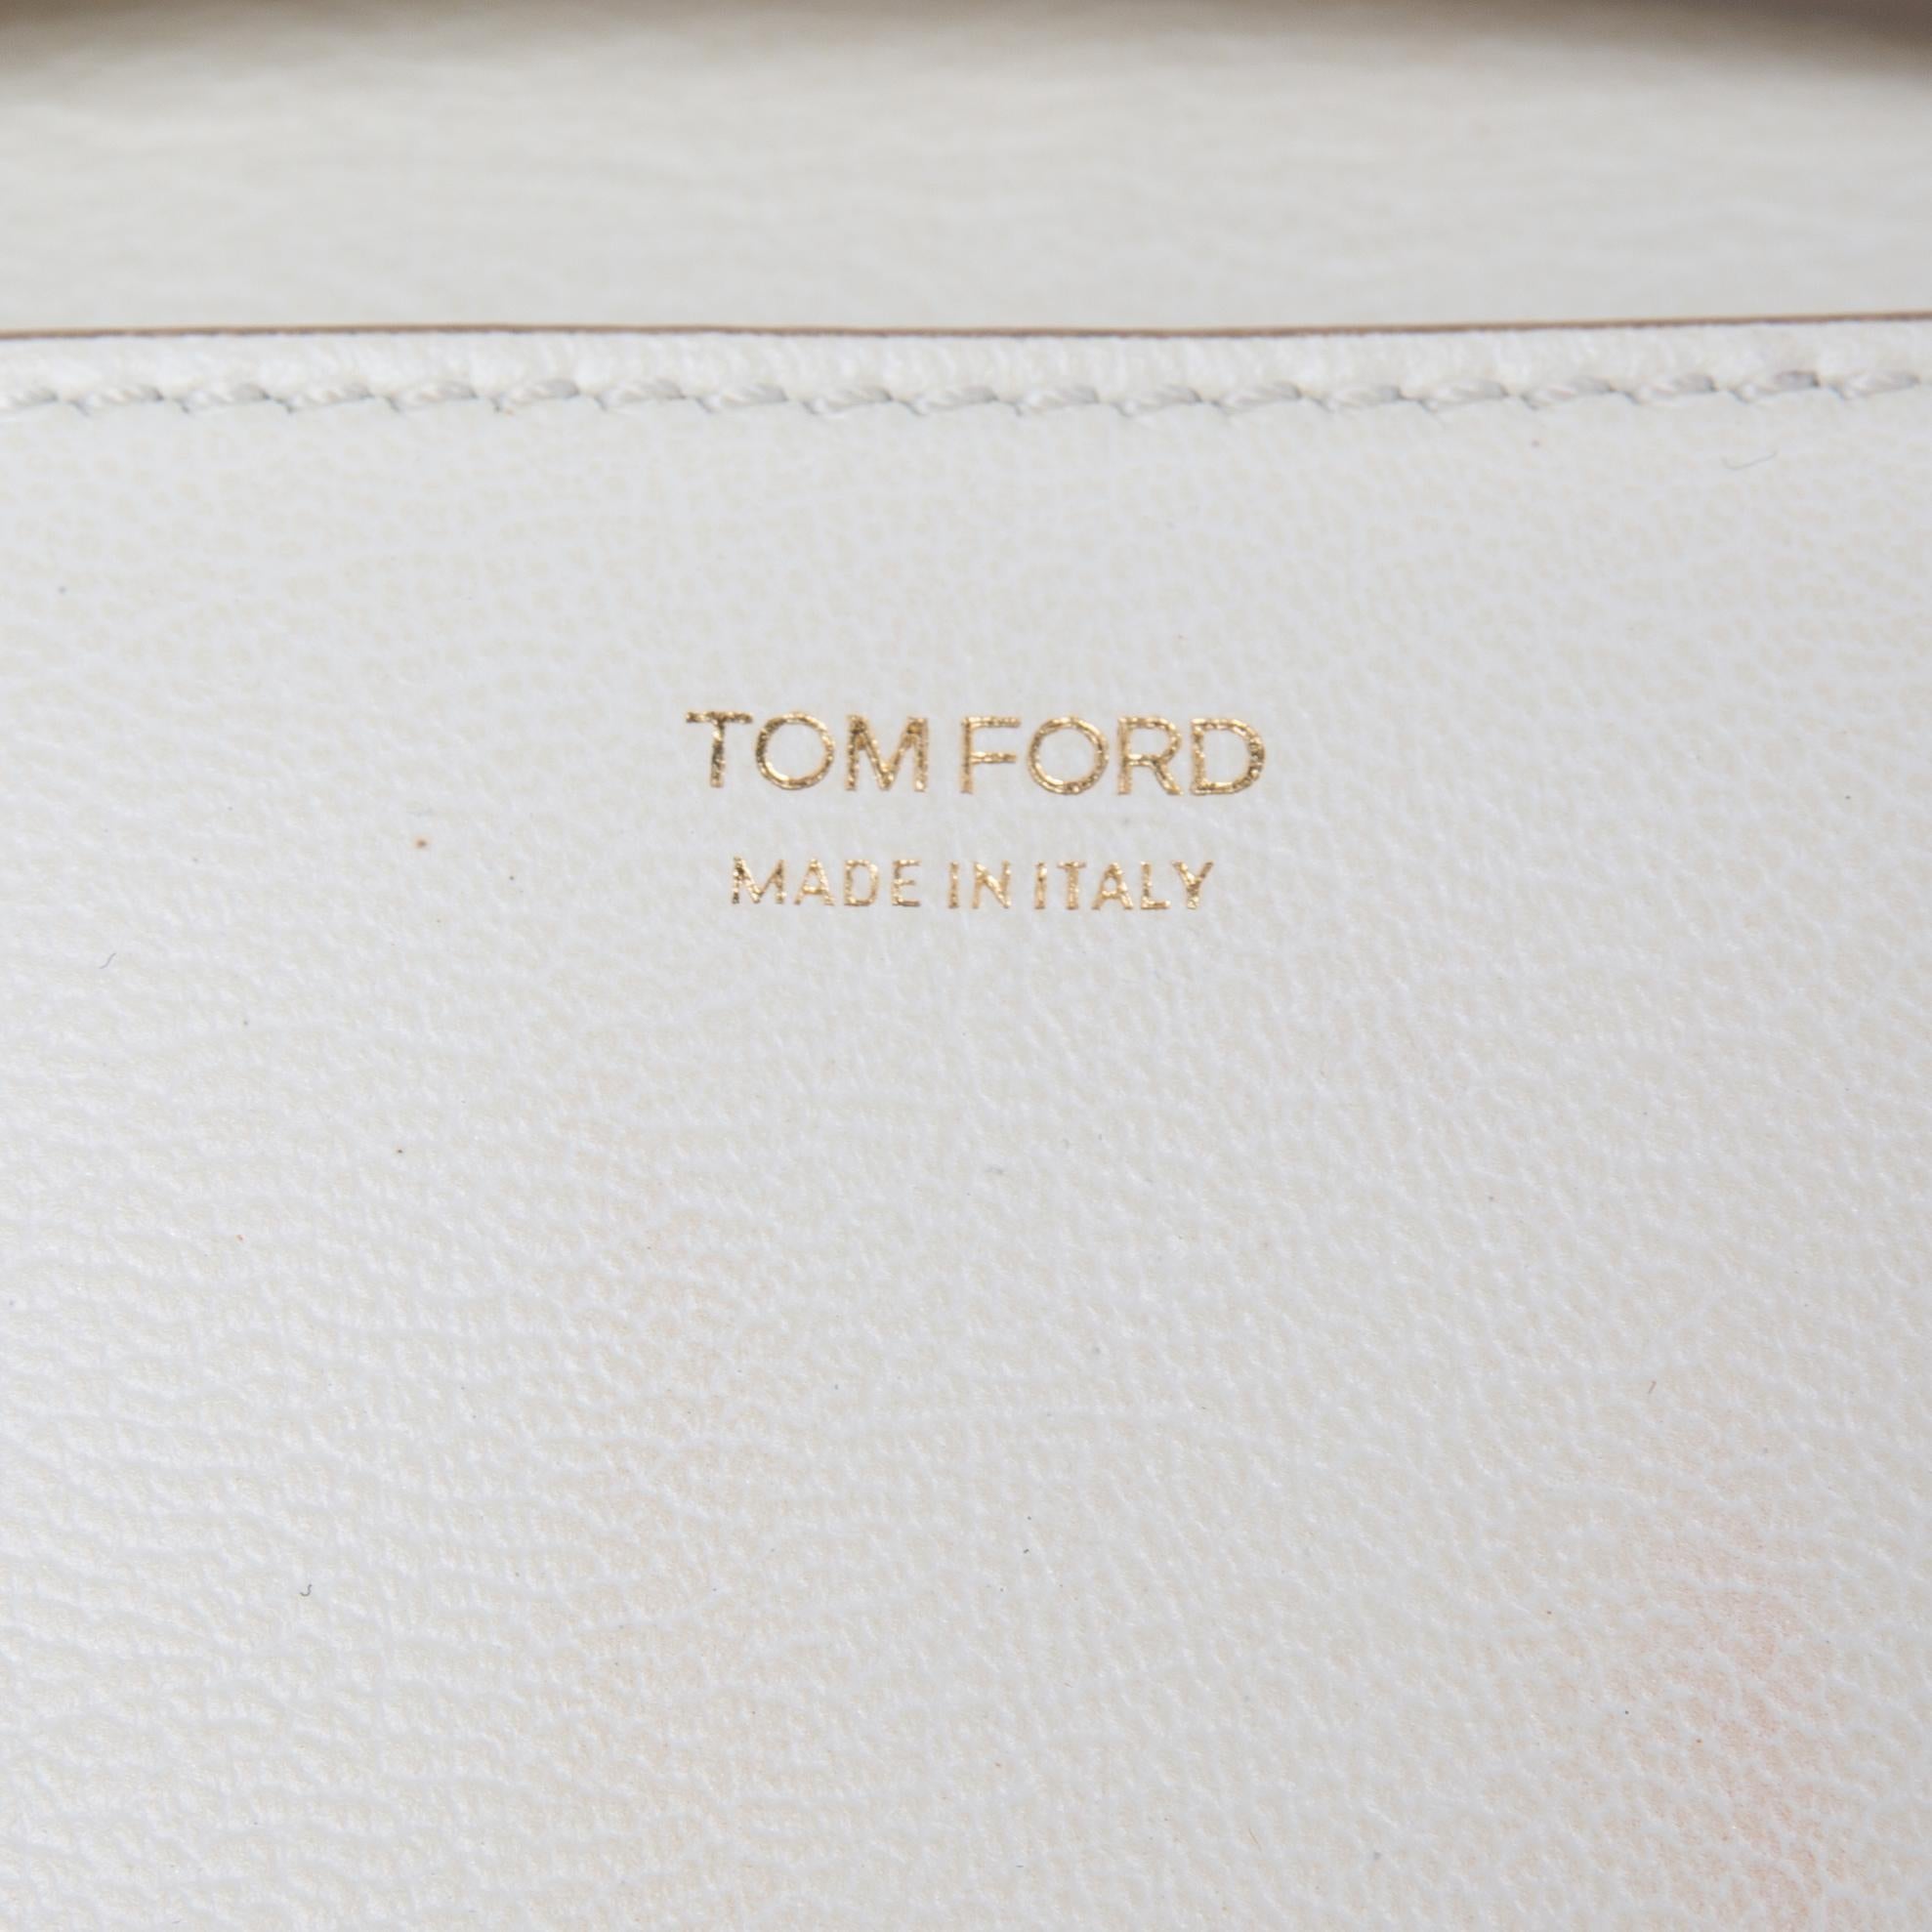 From the reputed eponymous fashion label Tom Ford, this Natalia shoulder bag has been crafted with a sense of upscale skill and style like none other. It is made meticulously using white leather with a gold-toned lock exhibiting the signature TF